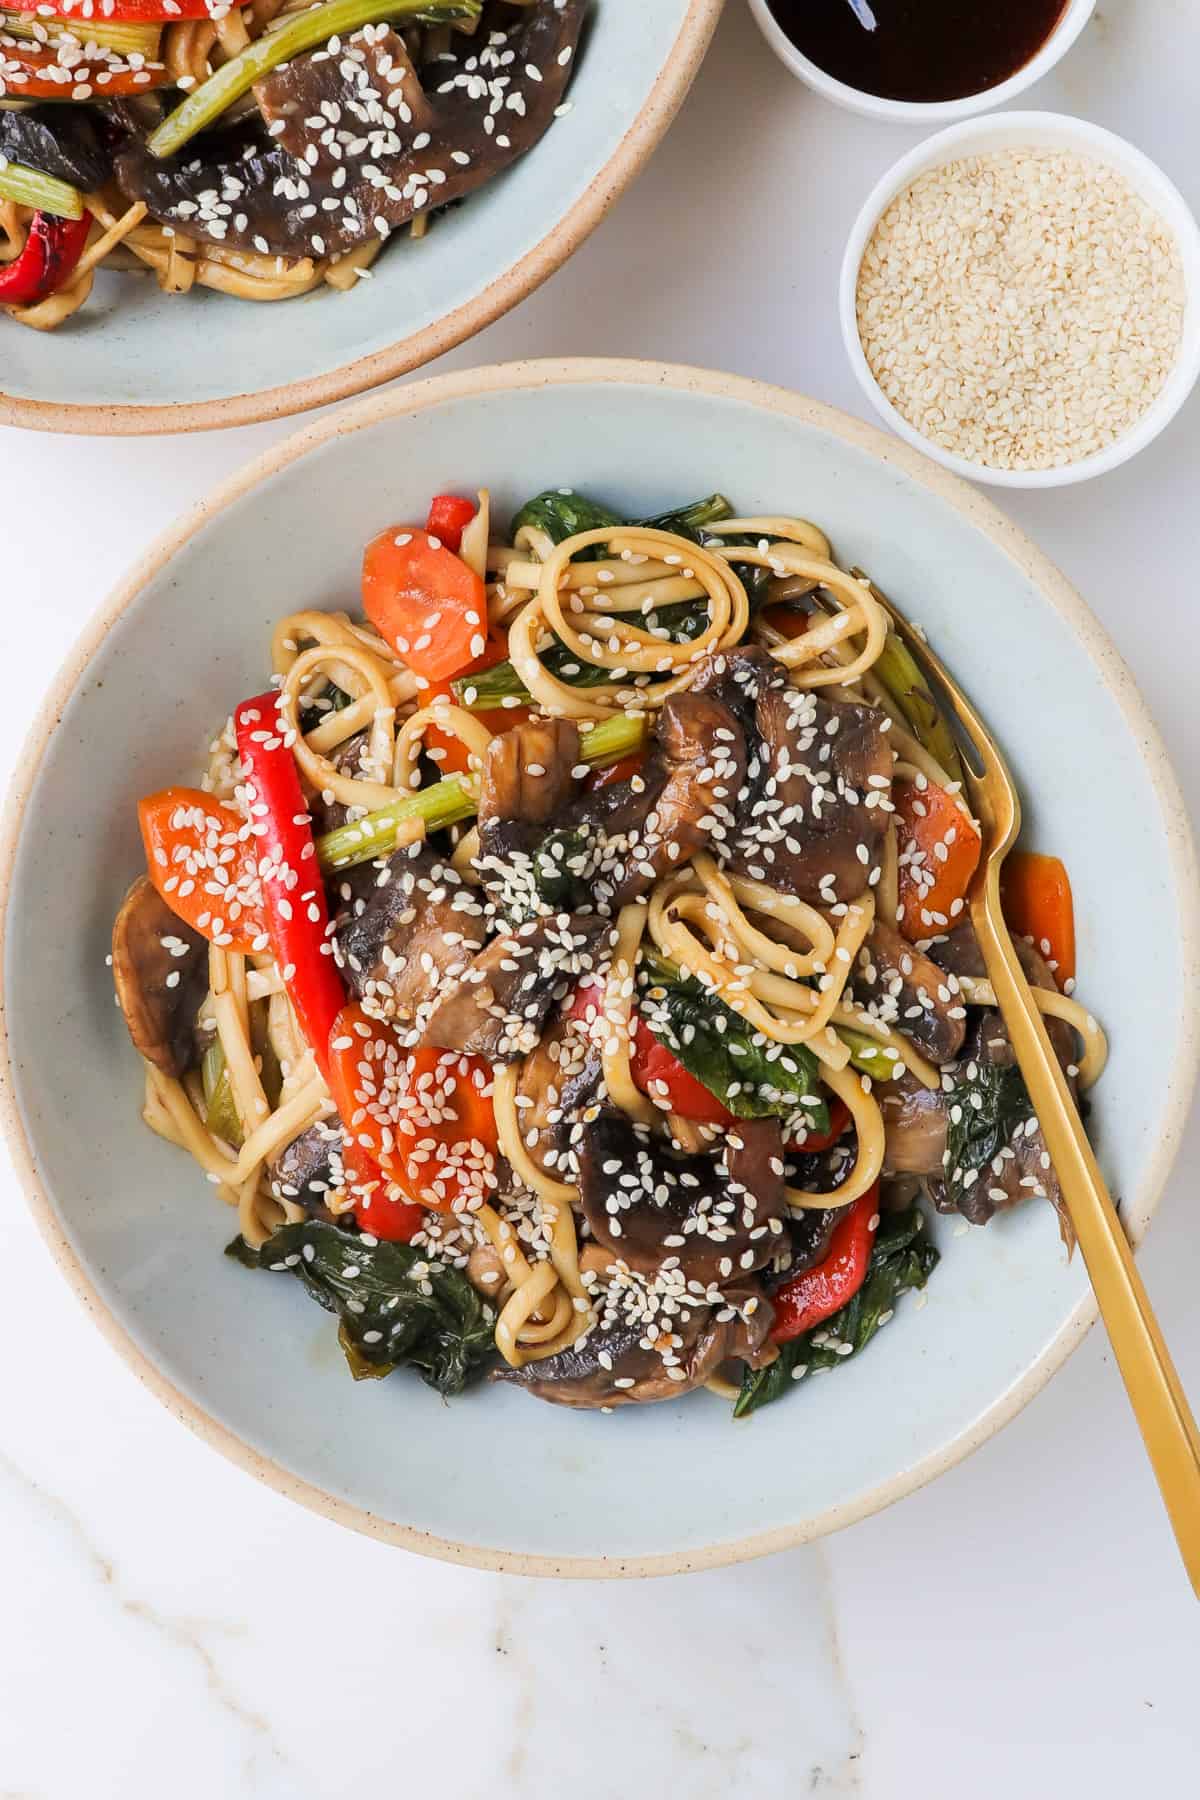 Teriyaki udon noodles with vegetables in a bowl with a gold fork. Sesame seeds sprinkled on top.